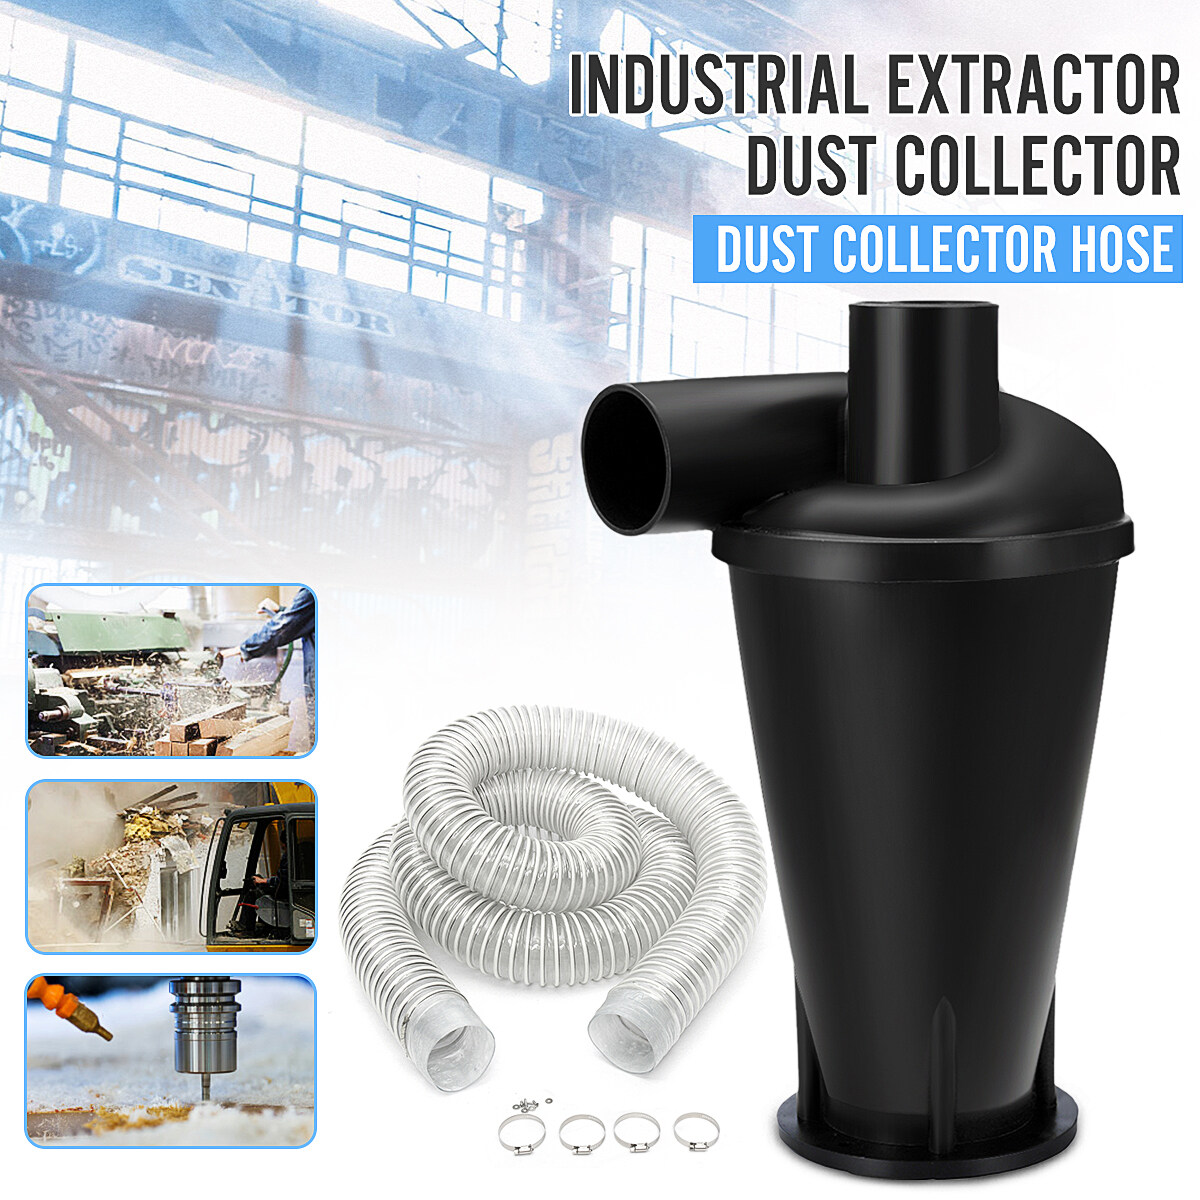 SN25T8 Dust Collector Industrial Extractor Woodworking Cyclone Vacuum Cleaner Filter Separation